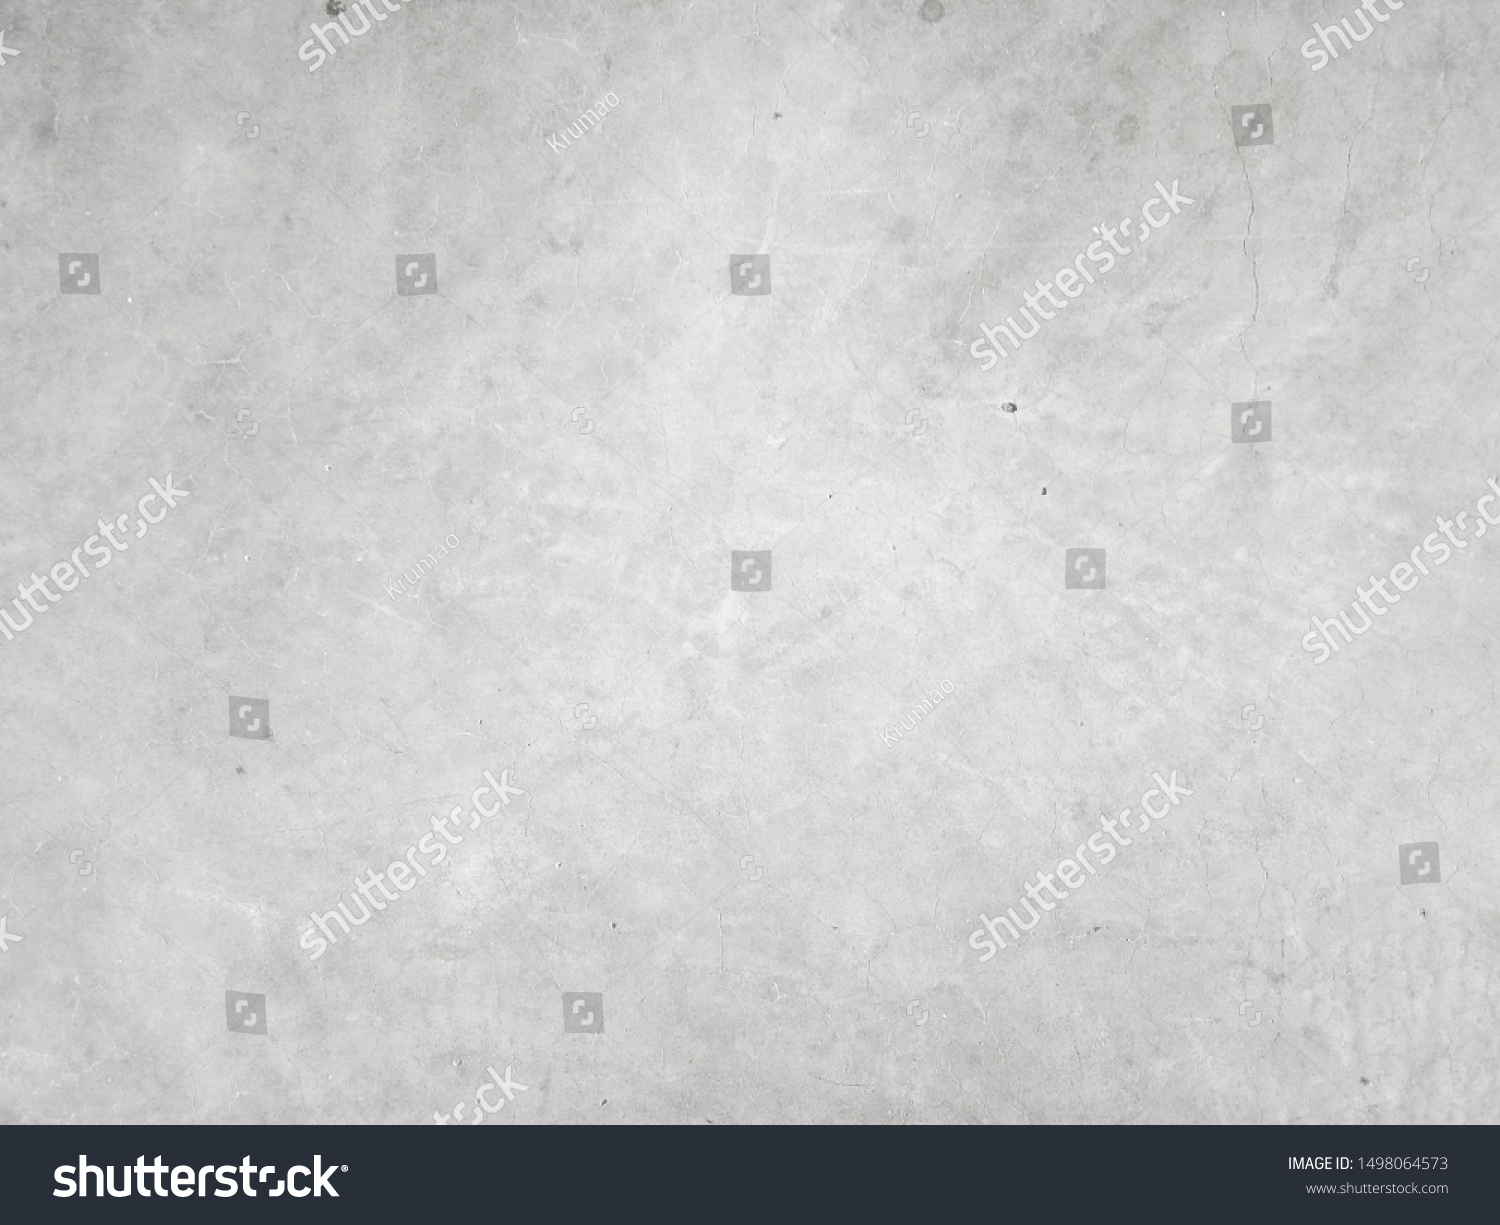 Cement wall background, not painted in vintage style for graphic design or retro wallpaper. Concrete pattern with aged texture. Loft type masonry found in rural areas. #1498064573